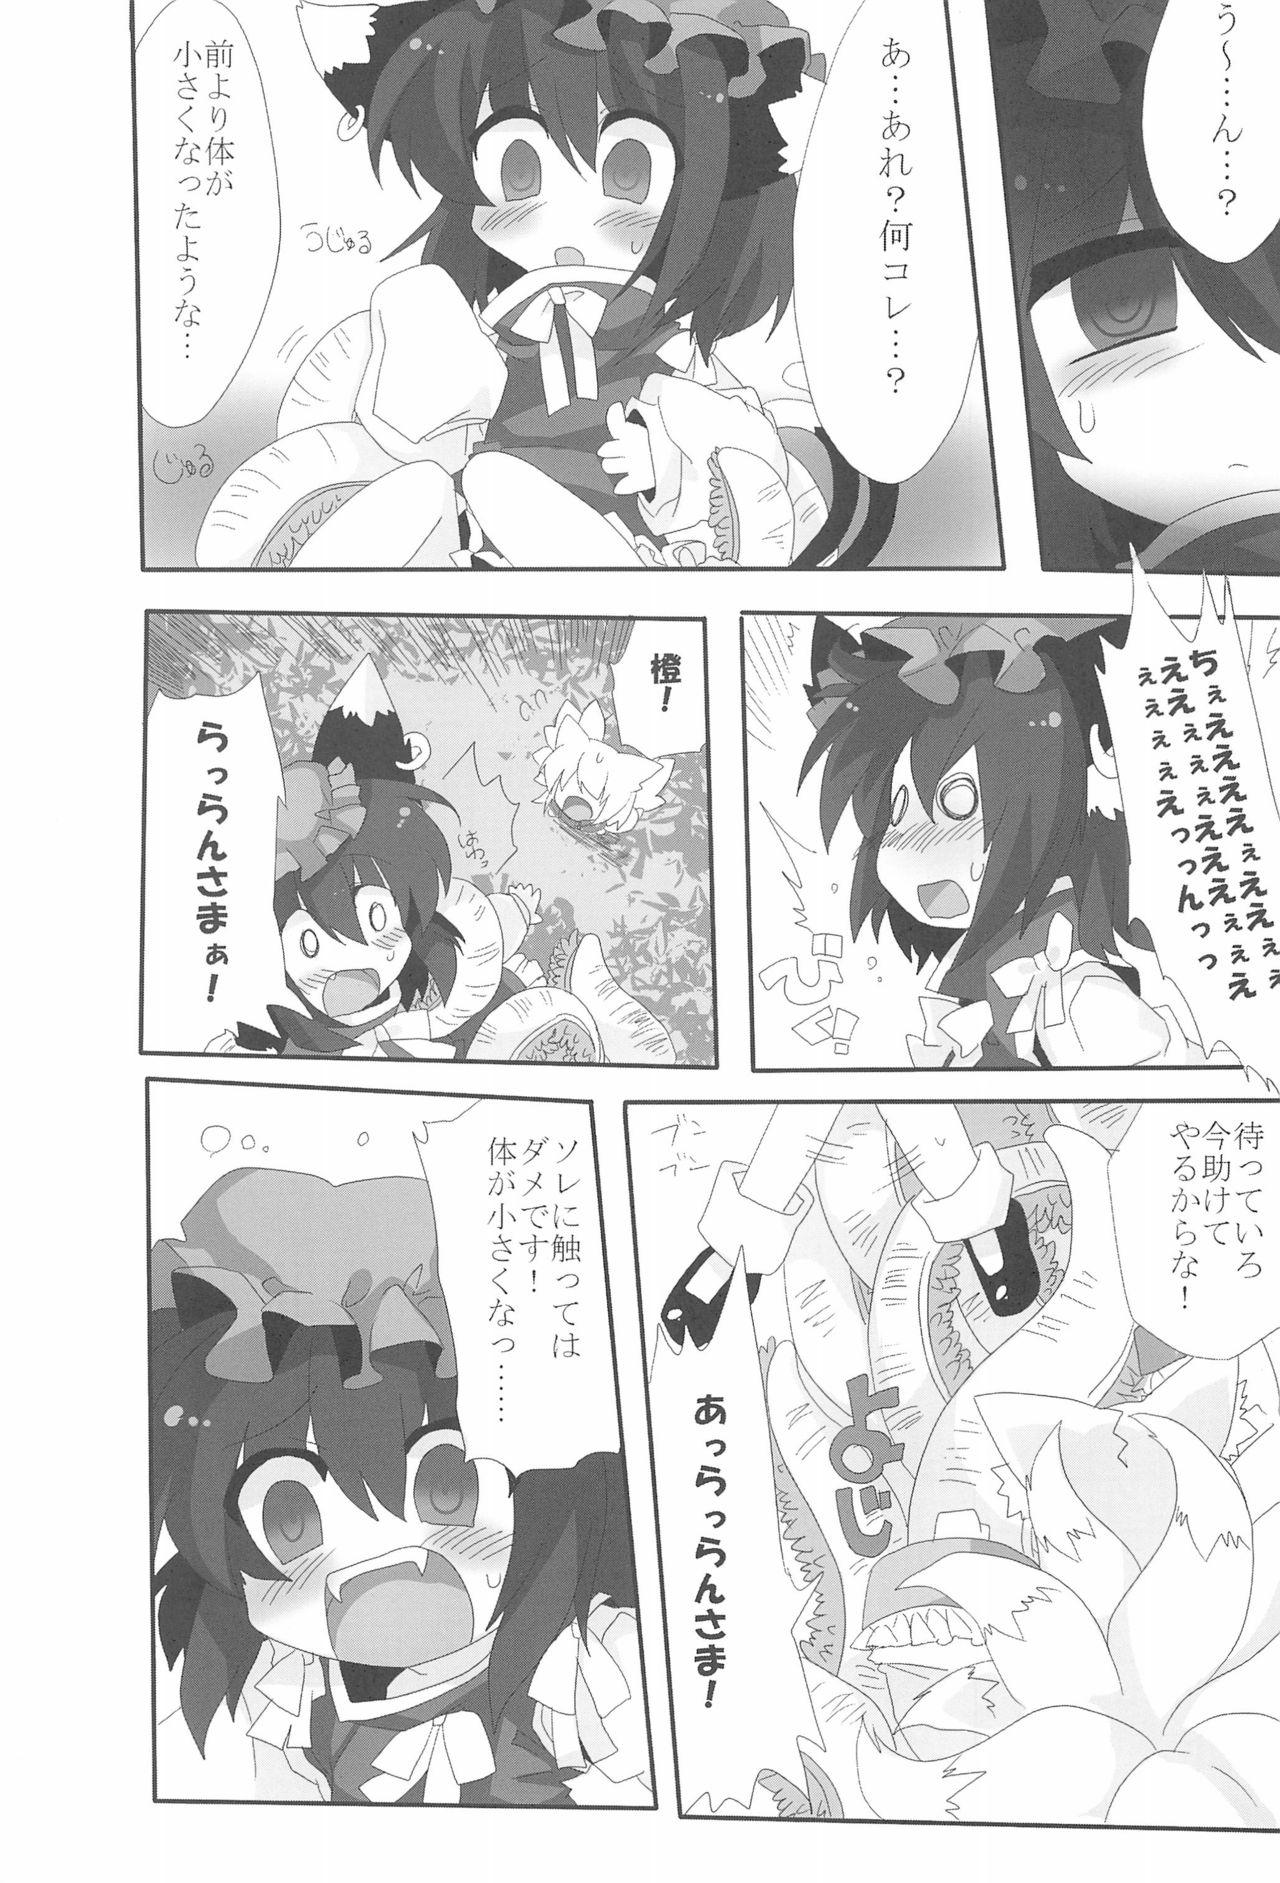 Gaygroup NYAS! ATTRACTION - Touhou project Perverted - Page 7